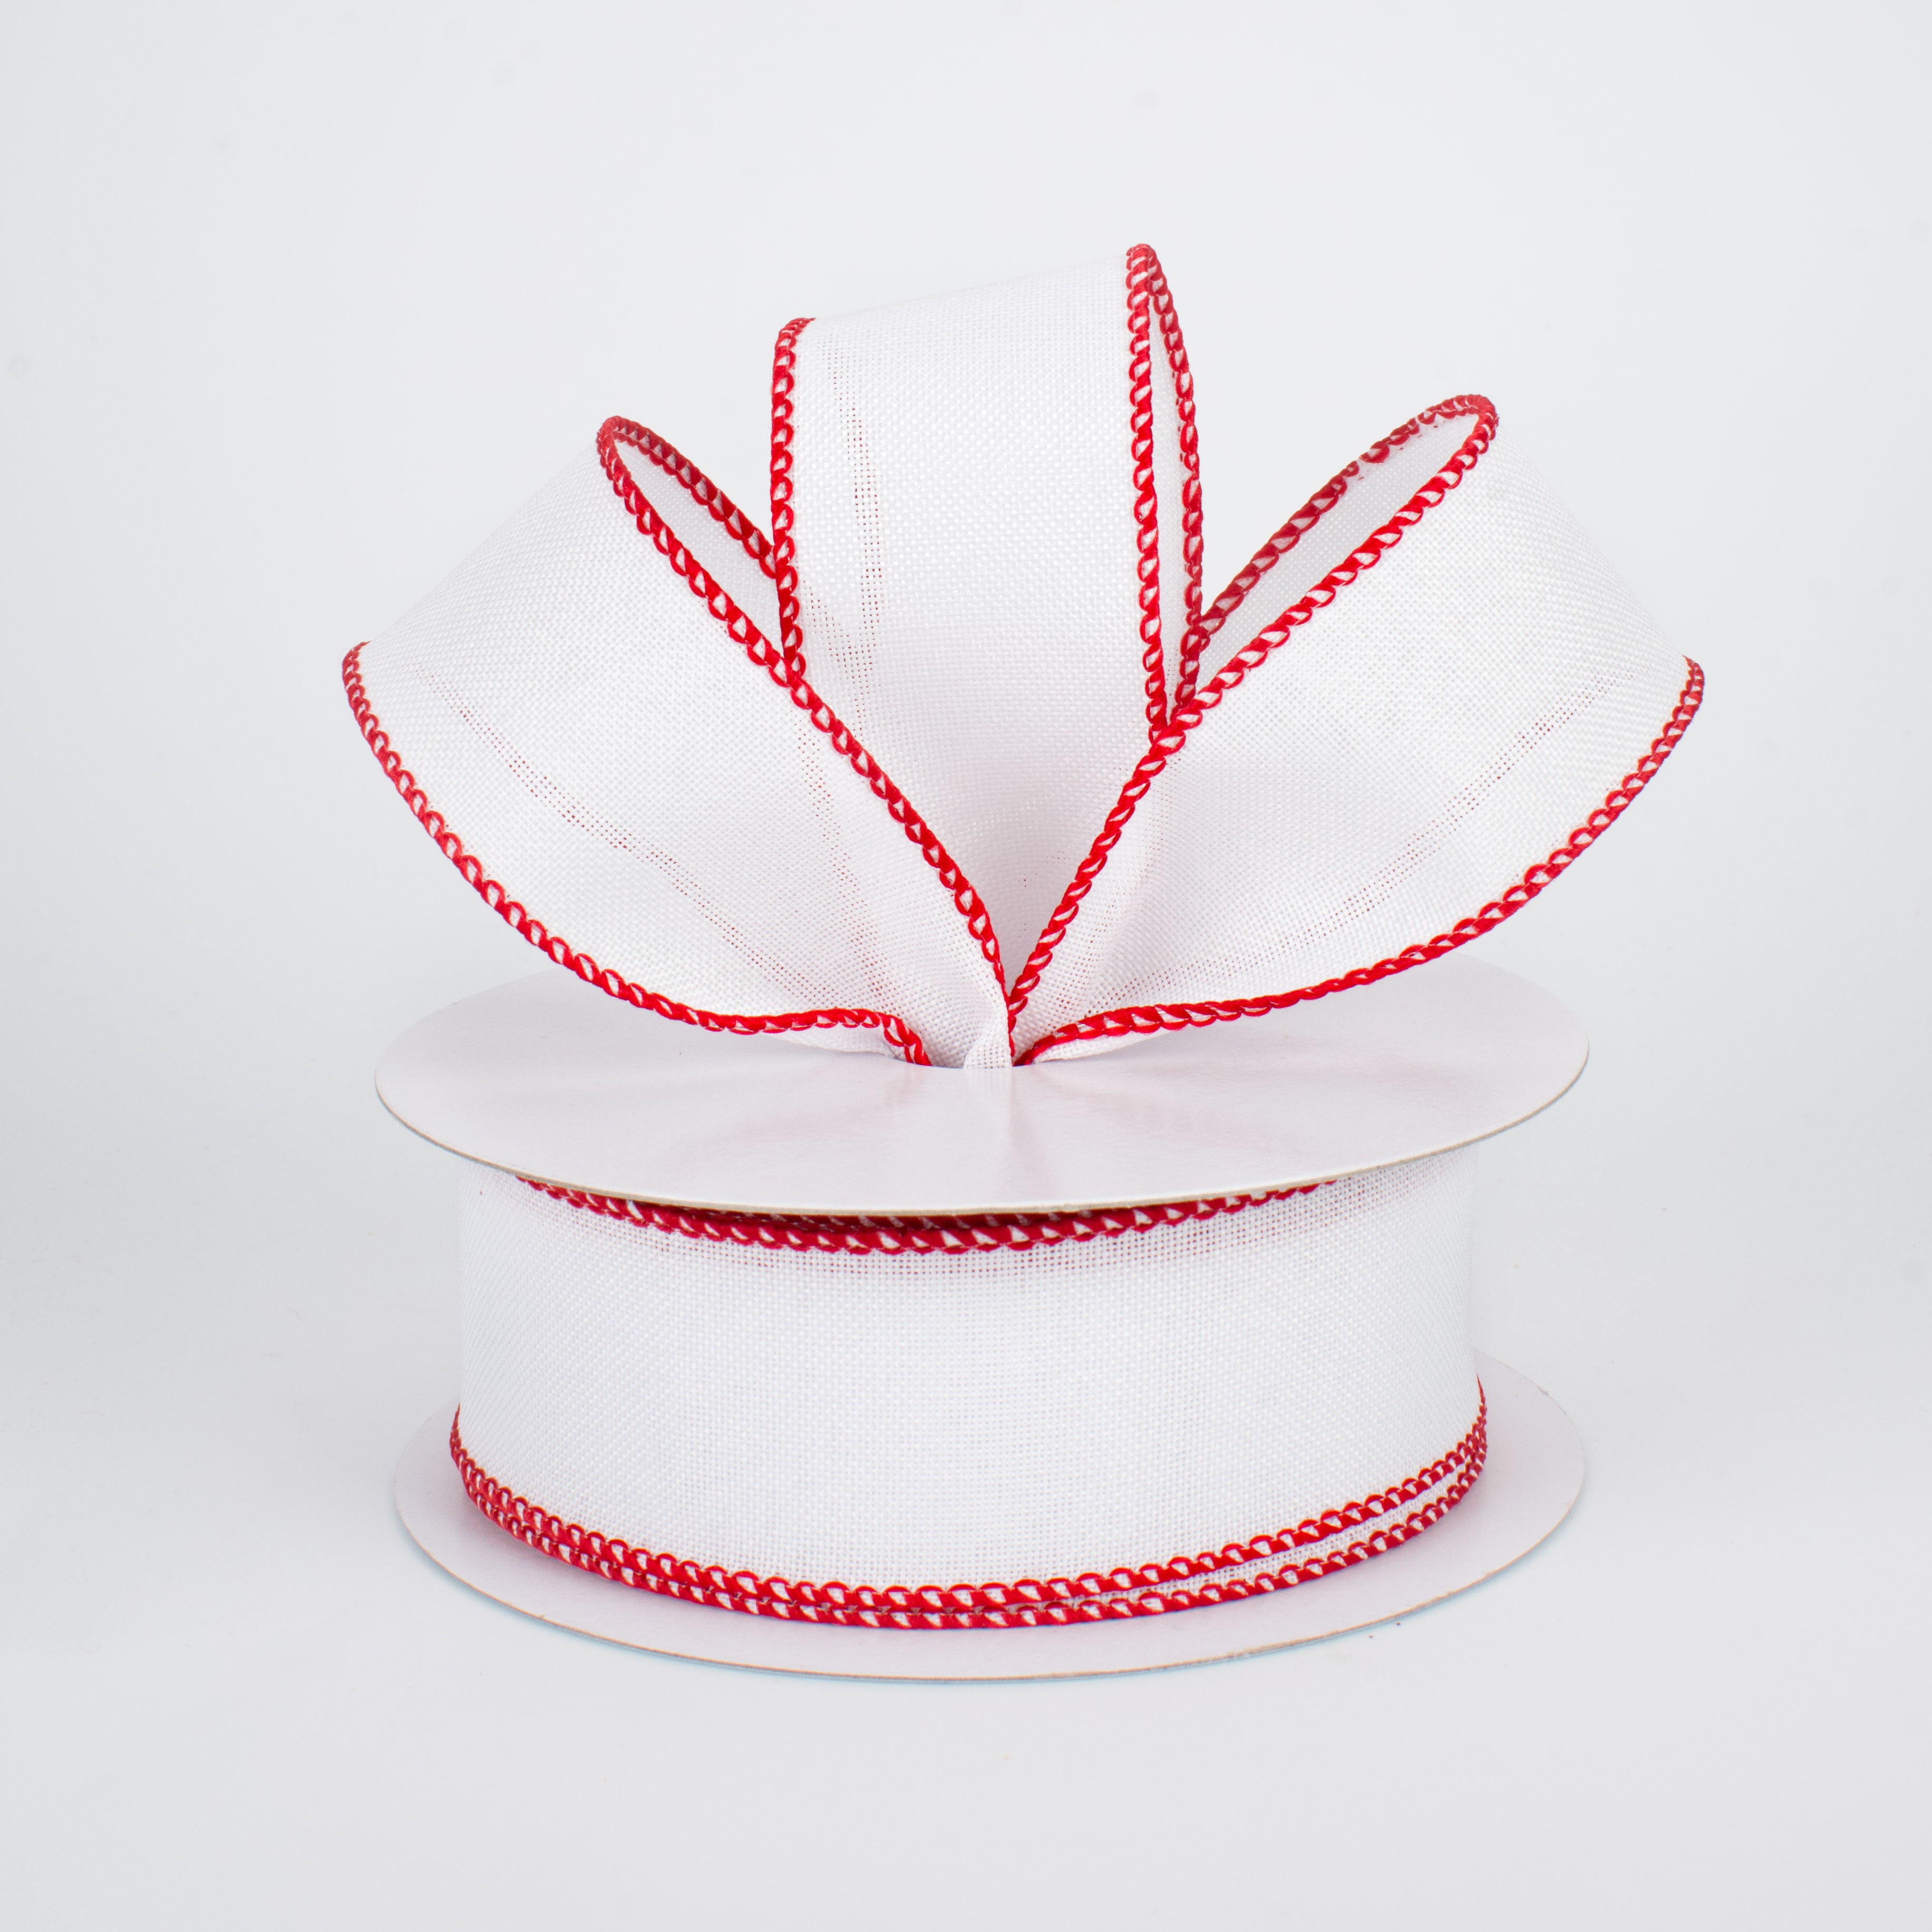 1.5" Stitched Edge Ribbon: White & Red (10 Yards)